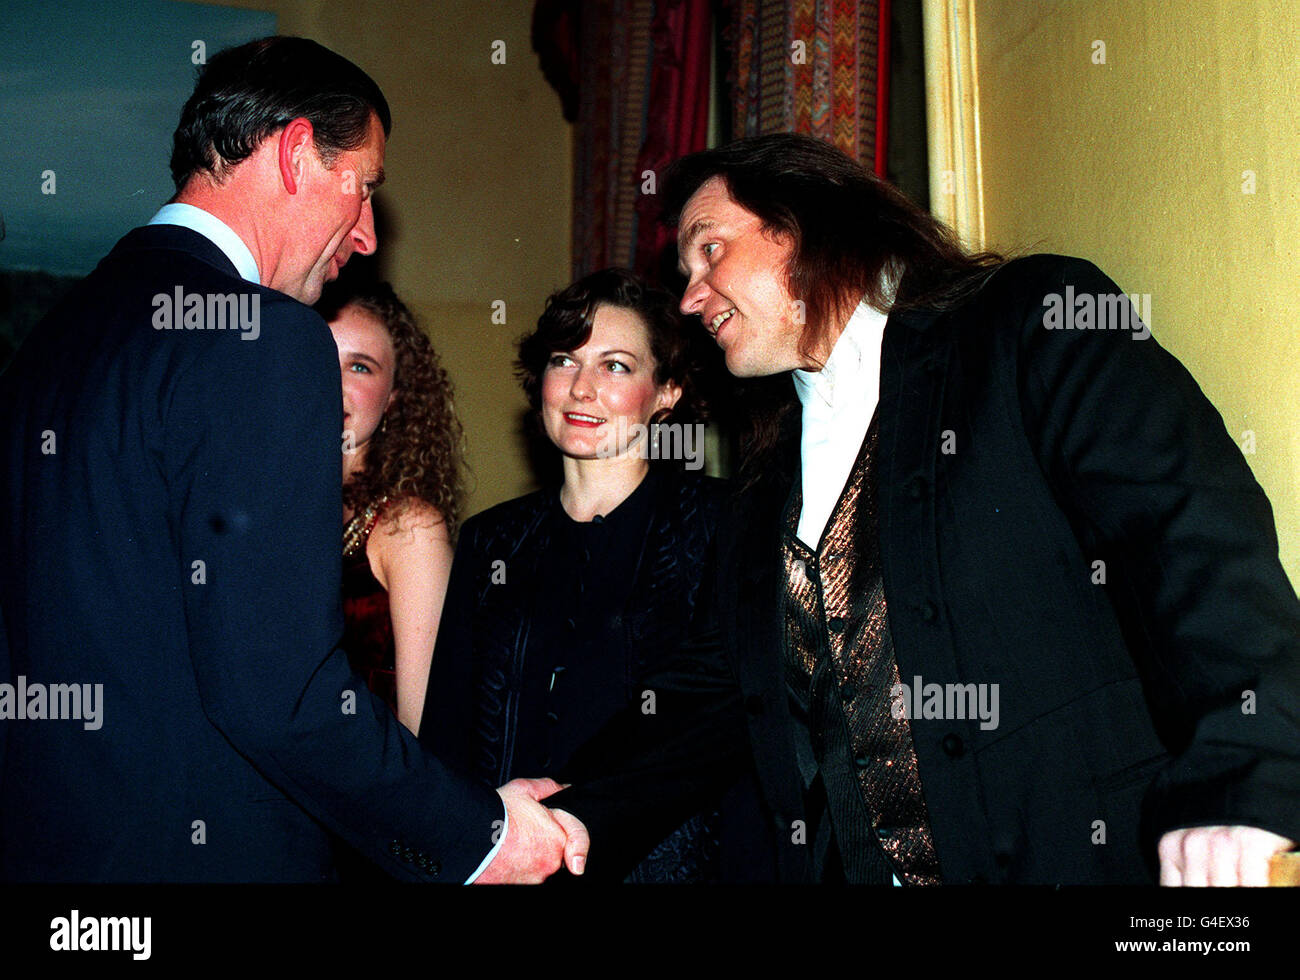 PA NEWS 17/11/94 THE PRINCE OF WALES SHAKES HANDS WITH SINGER Meat ...